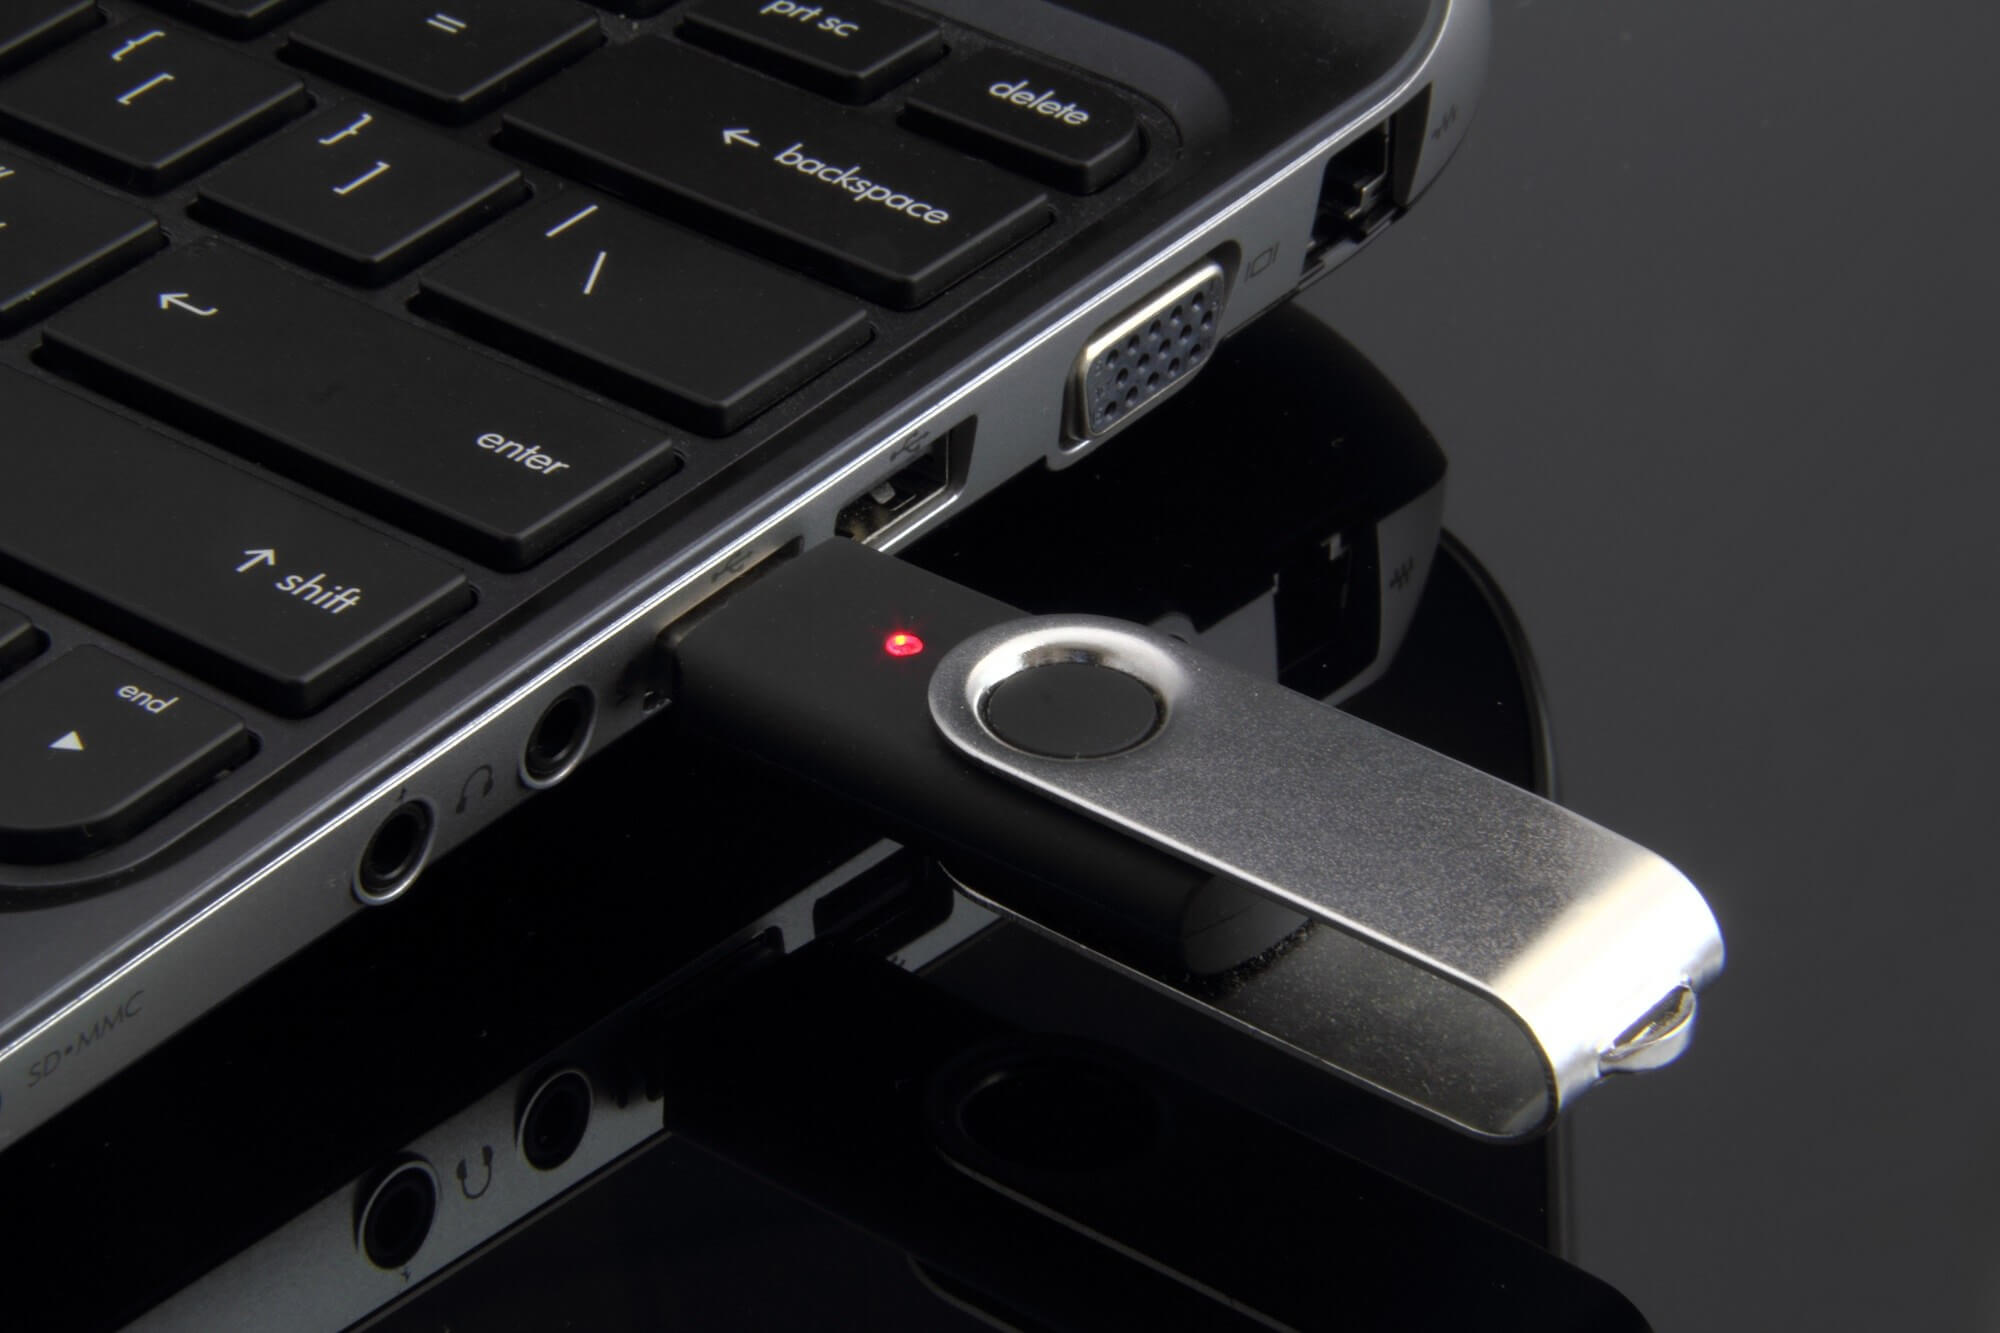 Solutions for Overcoming File Deletion Issues on Flash Drives